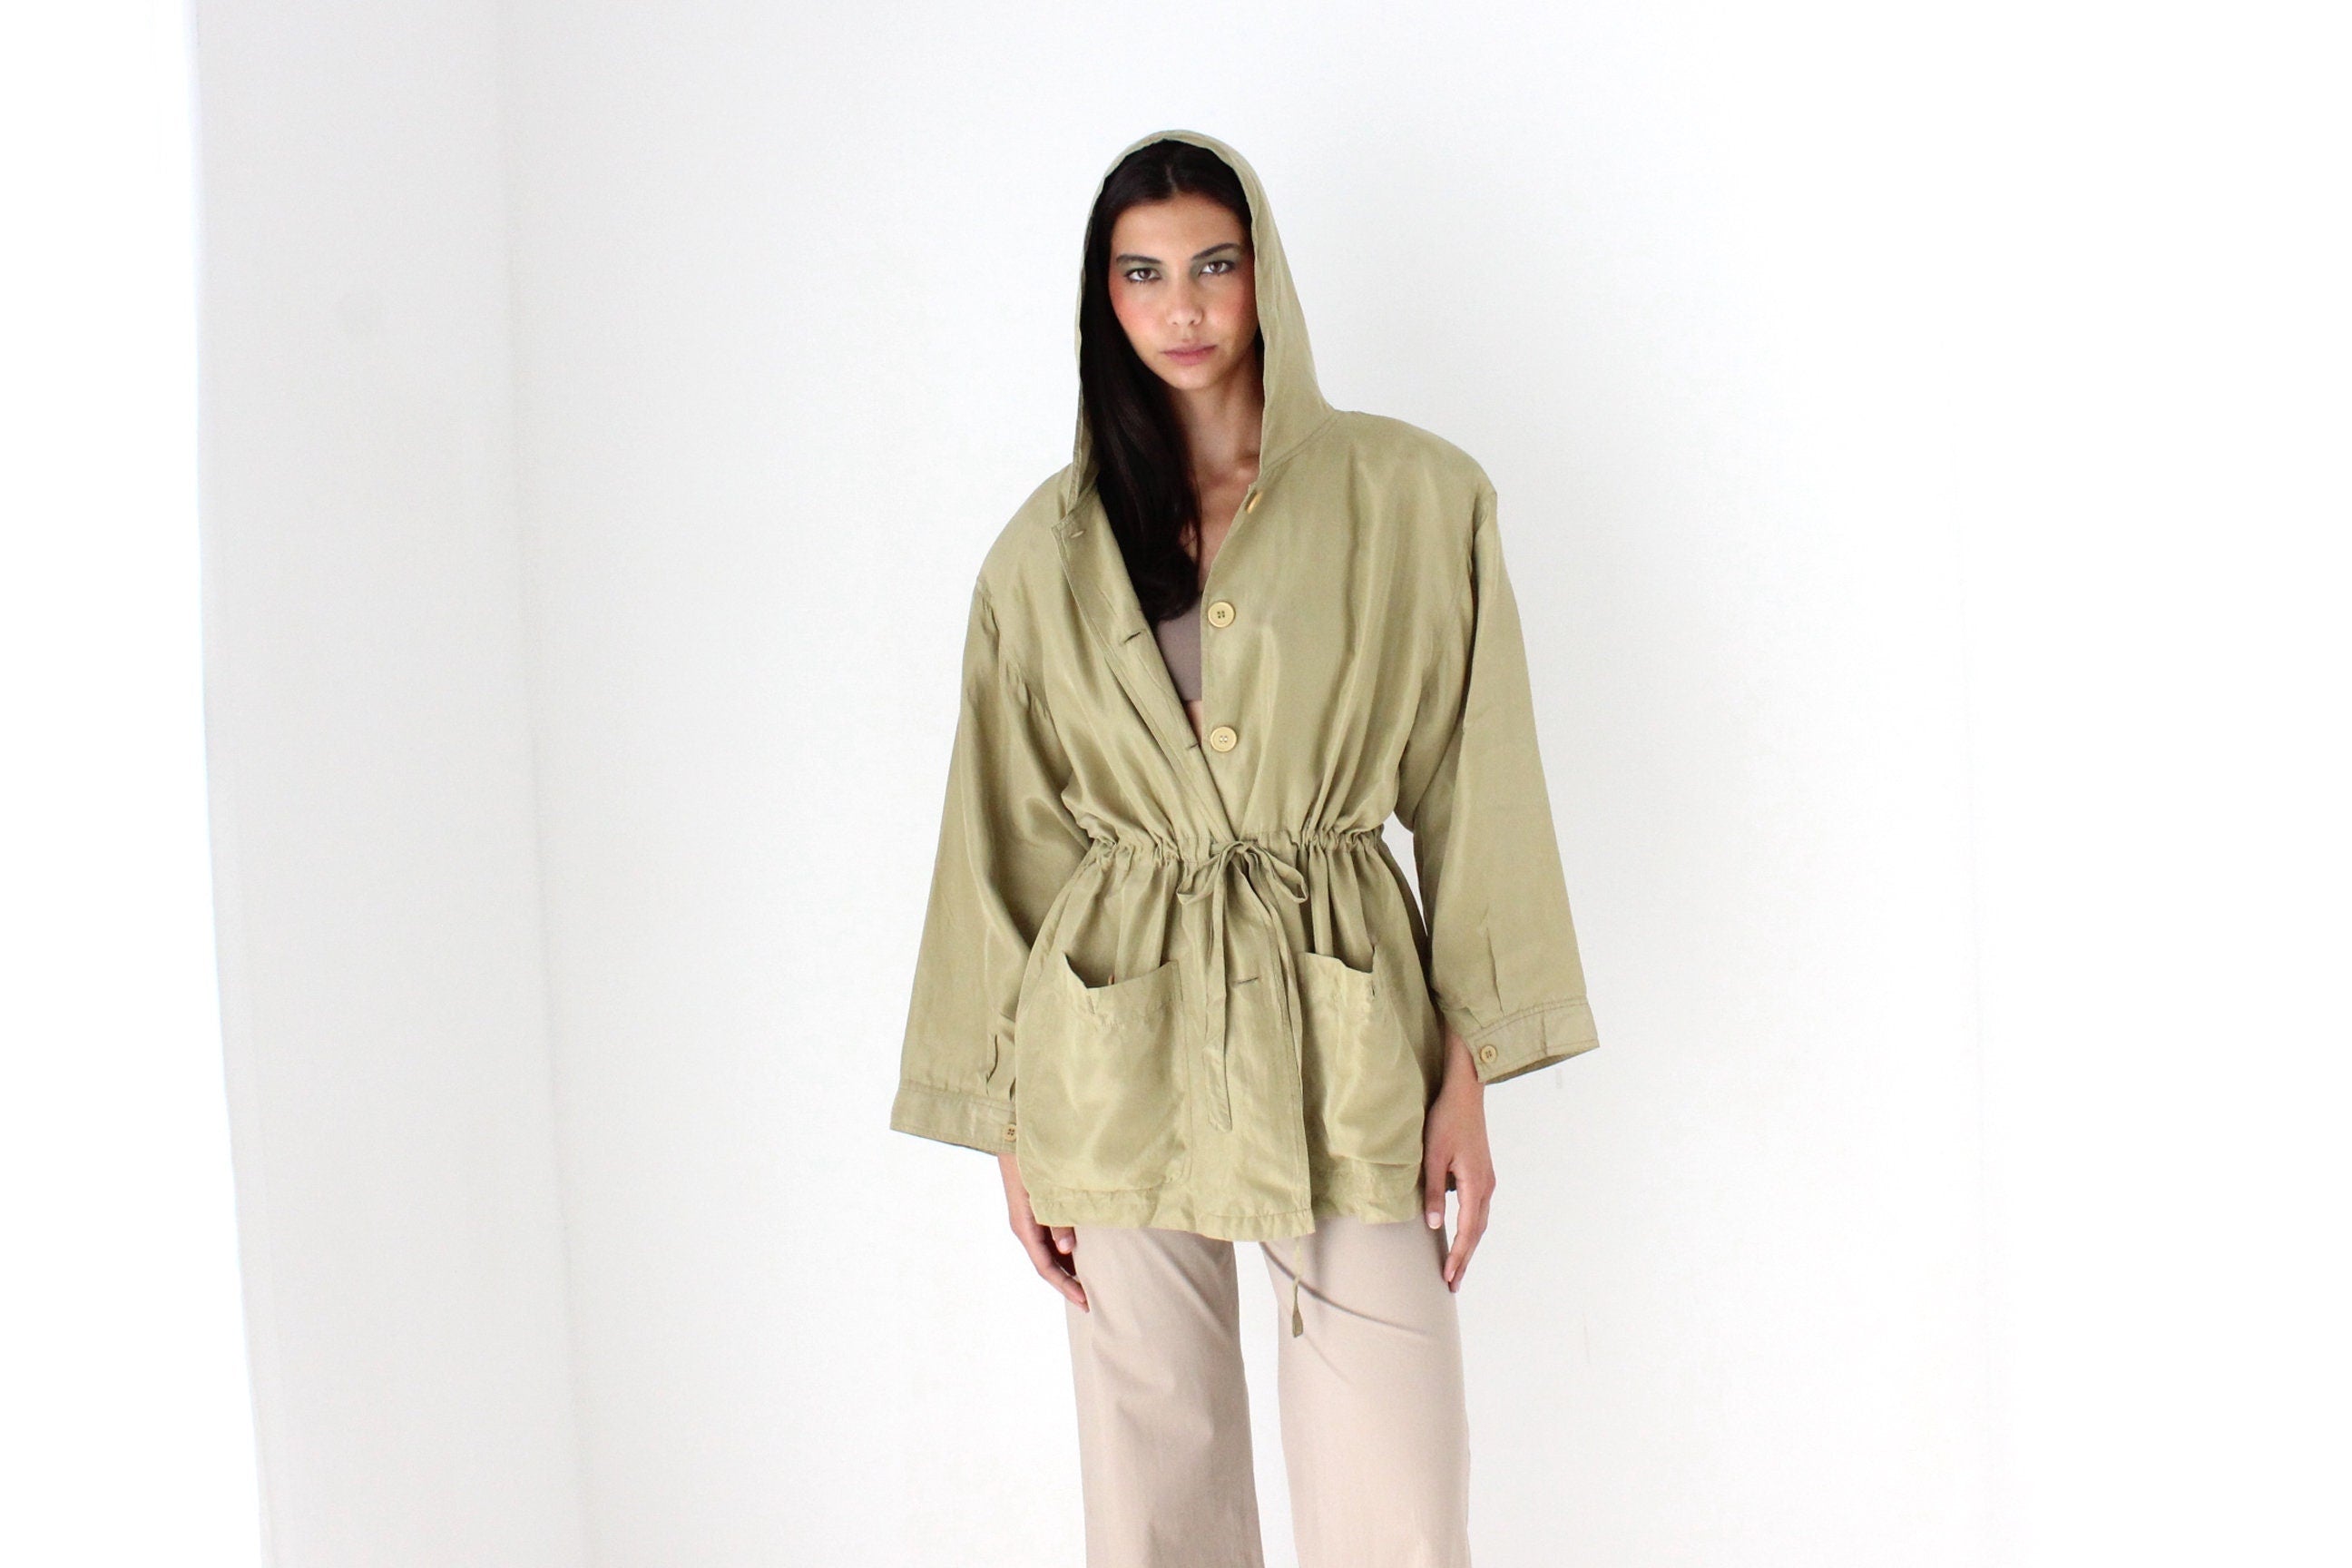 80s Pure Silk Olive Green Hooded Anorak